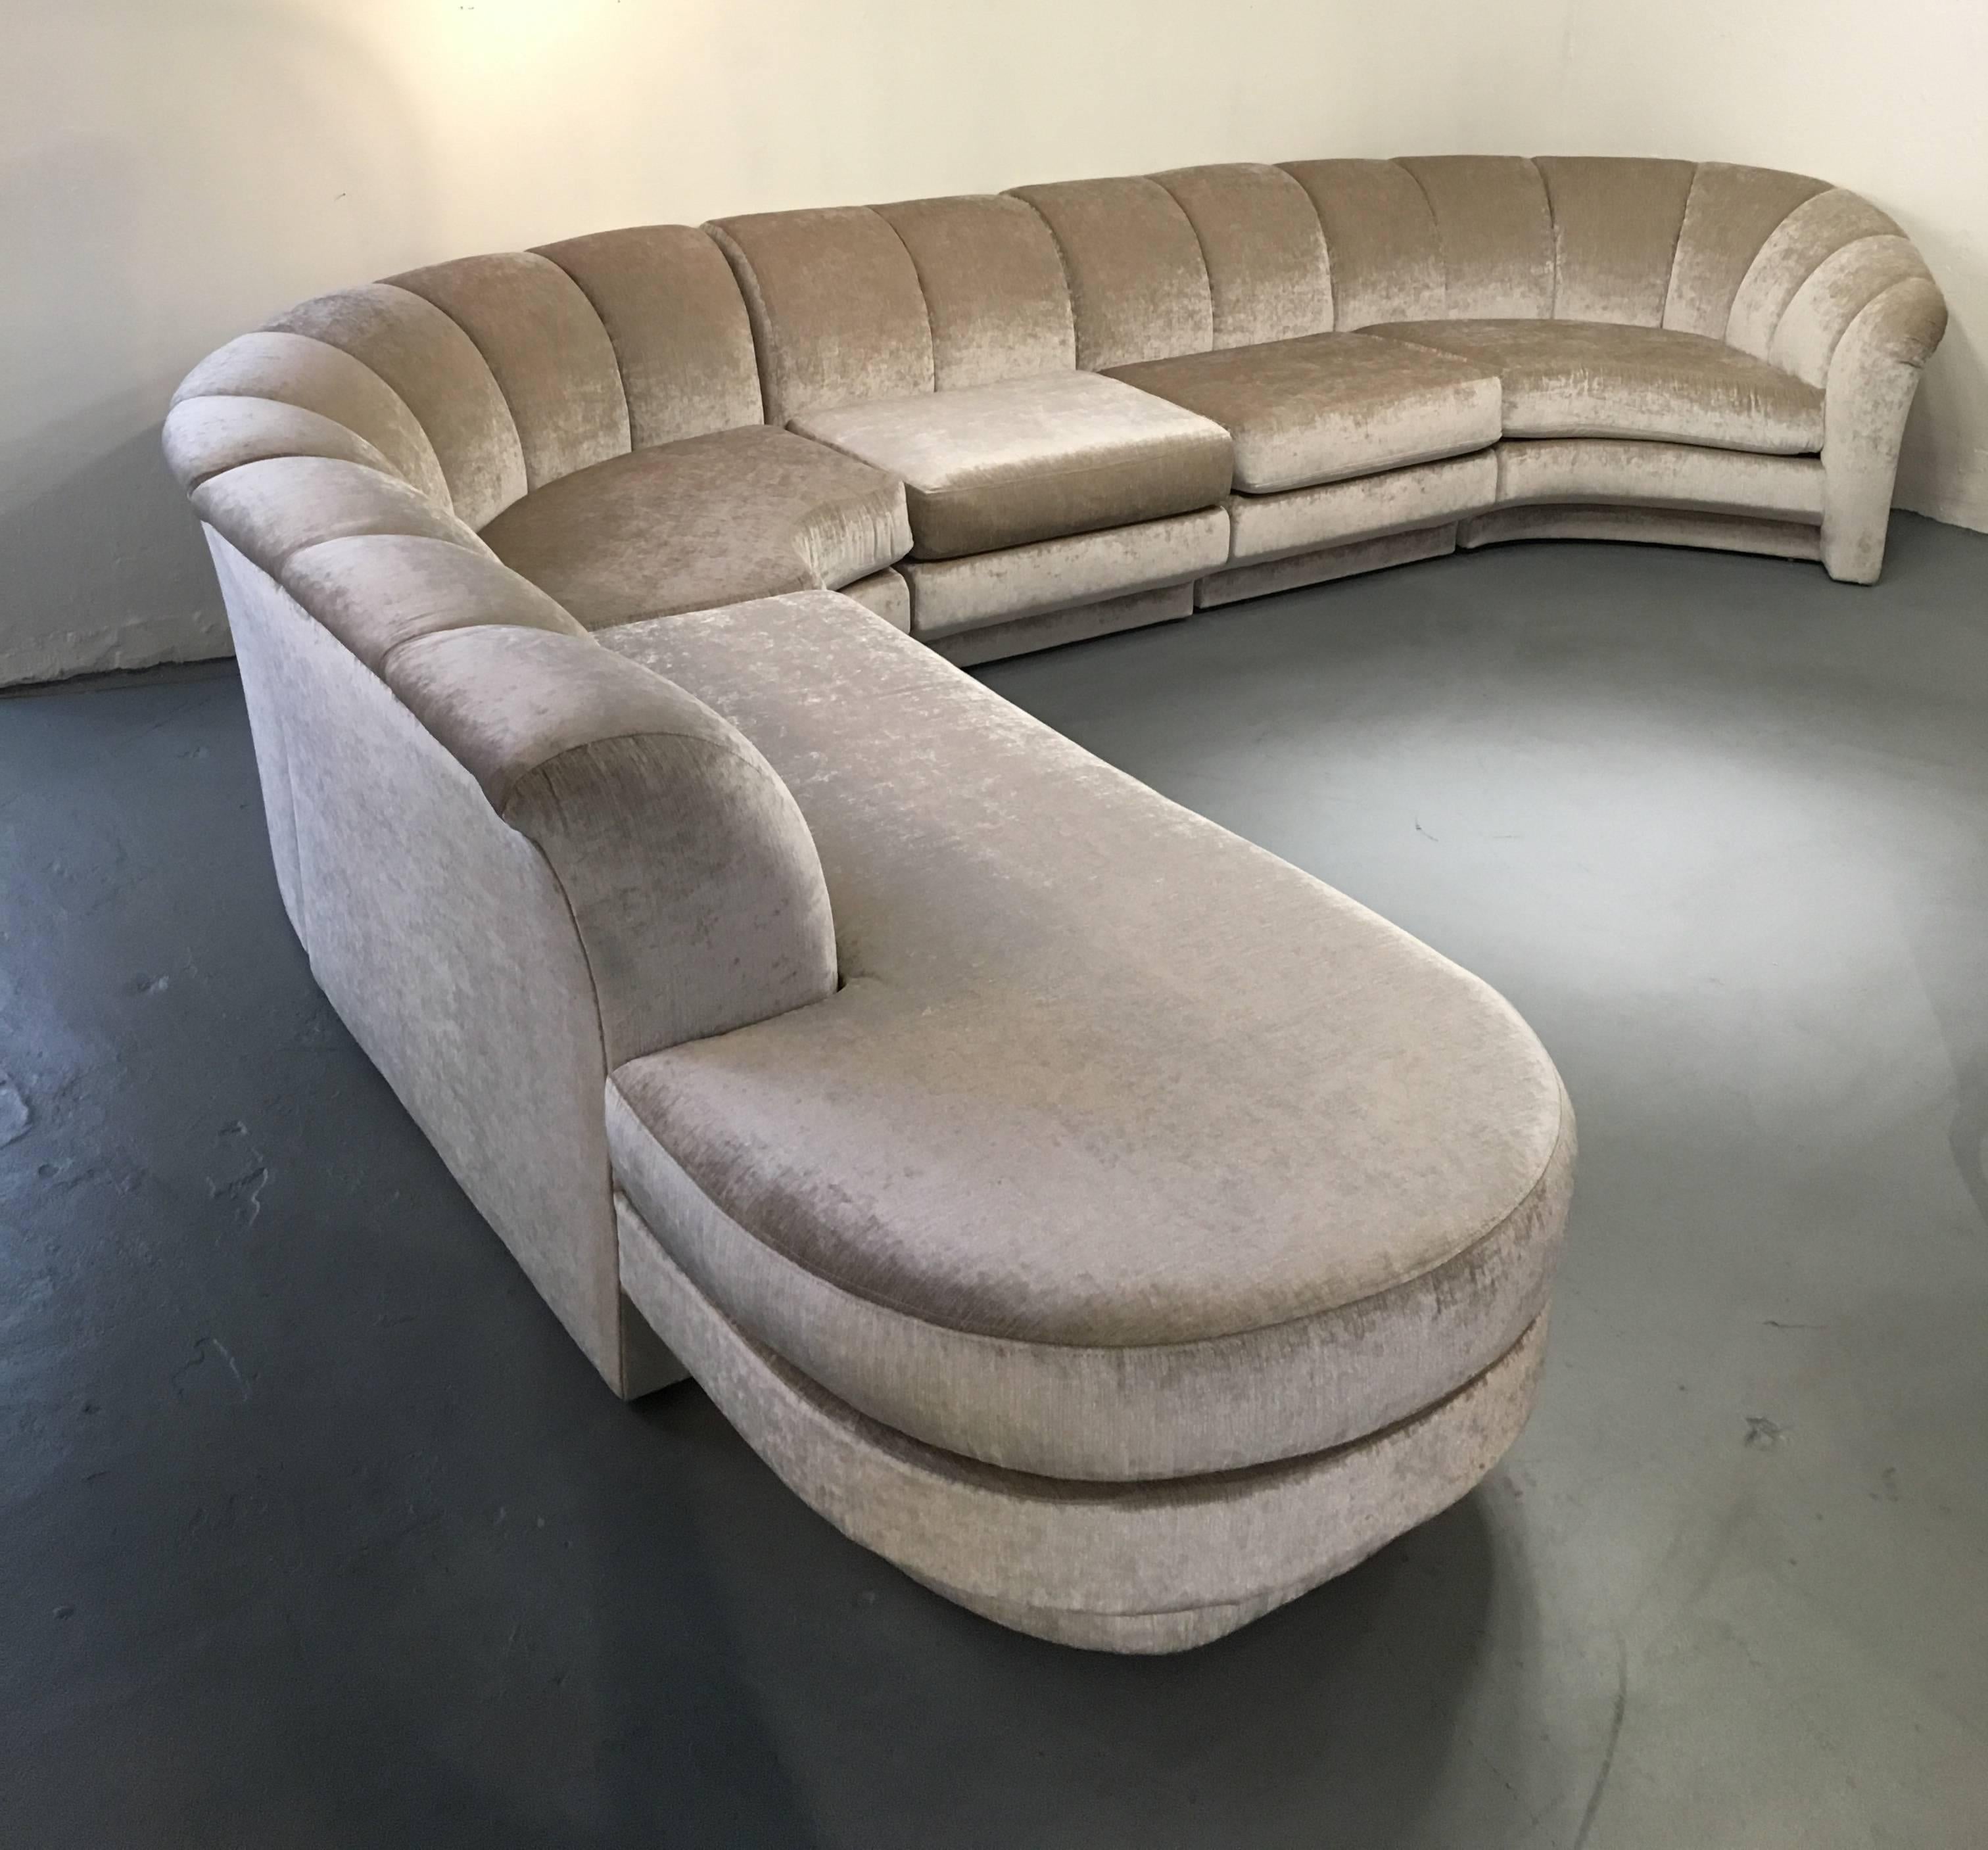 A glamorous Chanel back five-piece sectional sofa design by Milo Baughman for Thayer Coggin in the 1980s.

Newly recovered in a soft cream color chenille fabric.
Two of the sections can be moved to either side, to make one side shorter or longer.